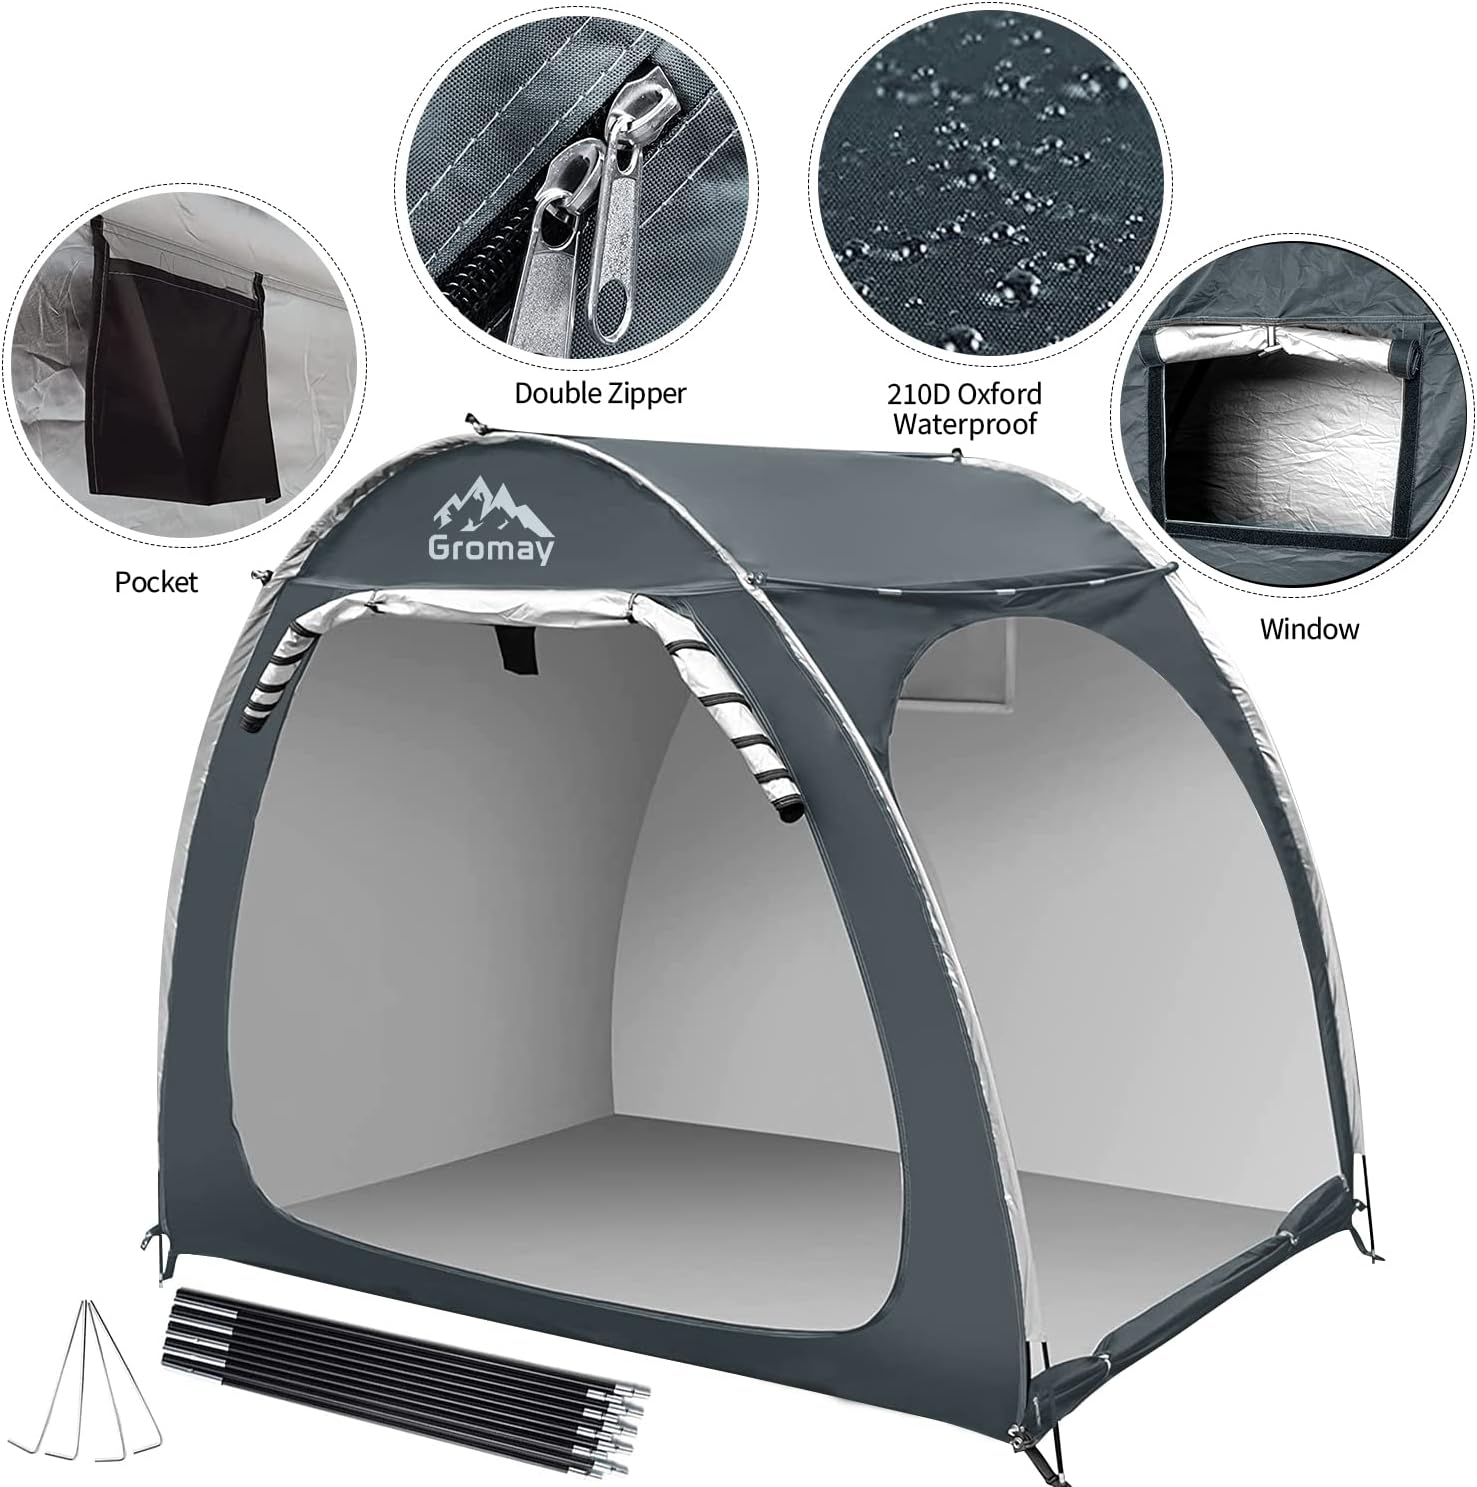 gromay Outdoor Bike Storage Tent, Portable Bicycle Motorcycle Storage Shed for 4 Bikes, Waterproof Silver Coated Oxford Bike Cover, Fo